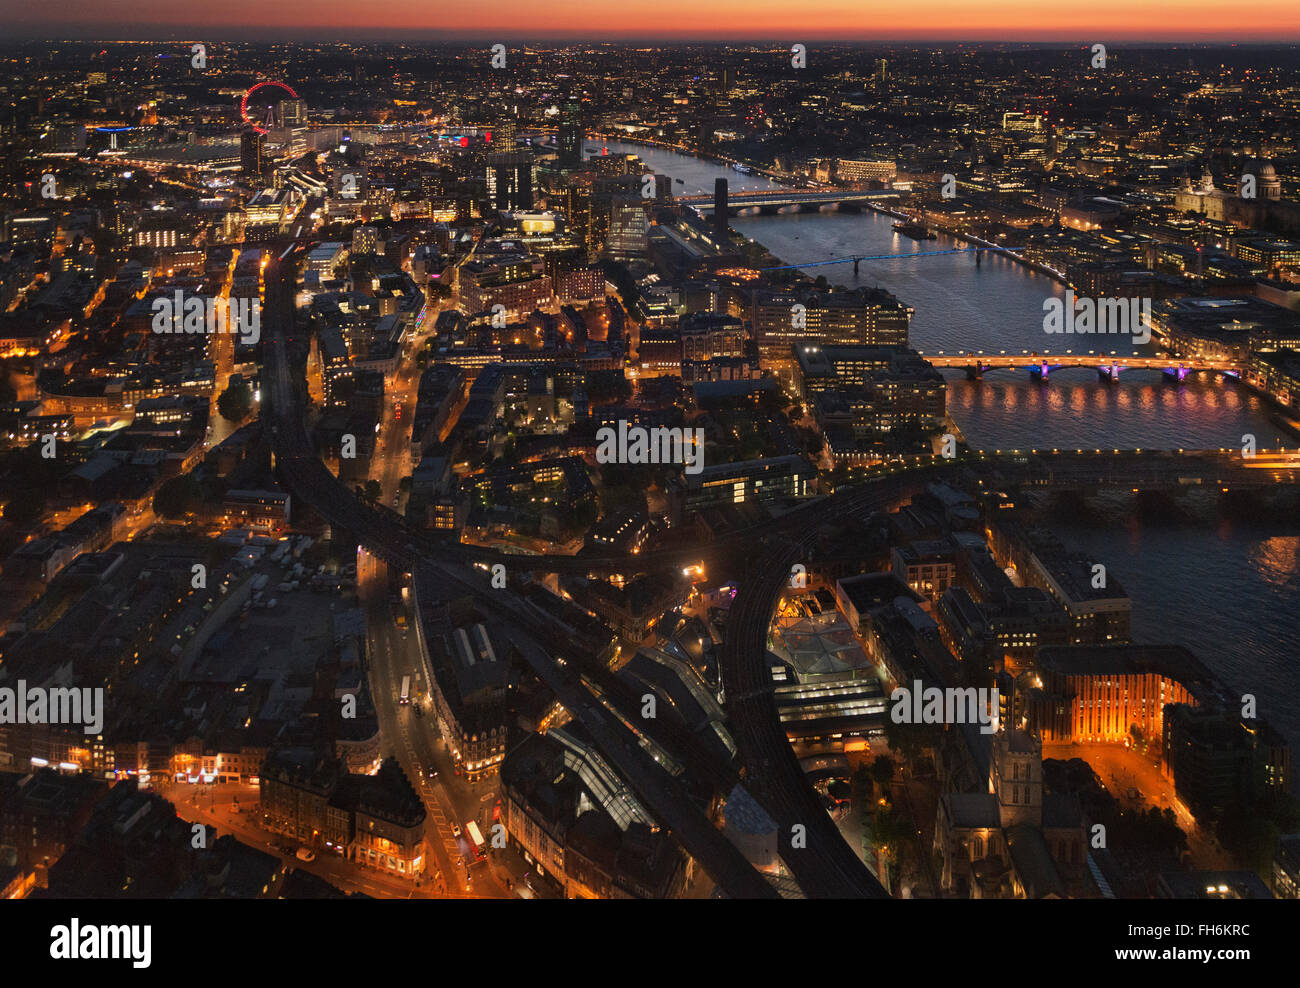 An aerial view of the River Thames at dusk in London, England. (Adrien Veczan) Stock Photo